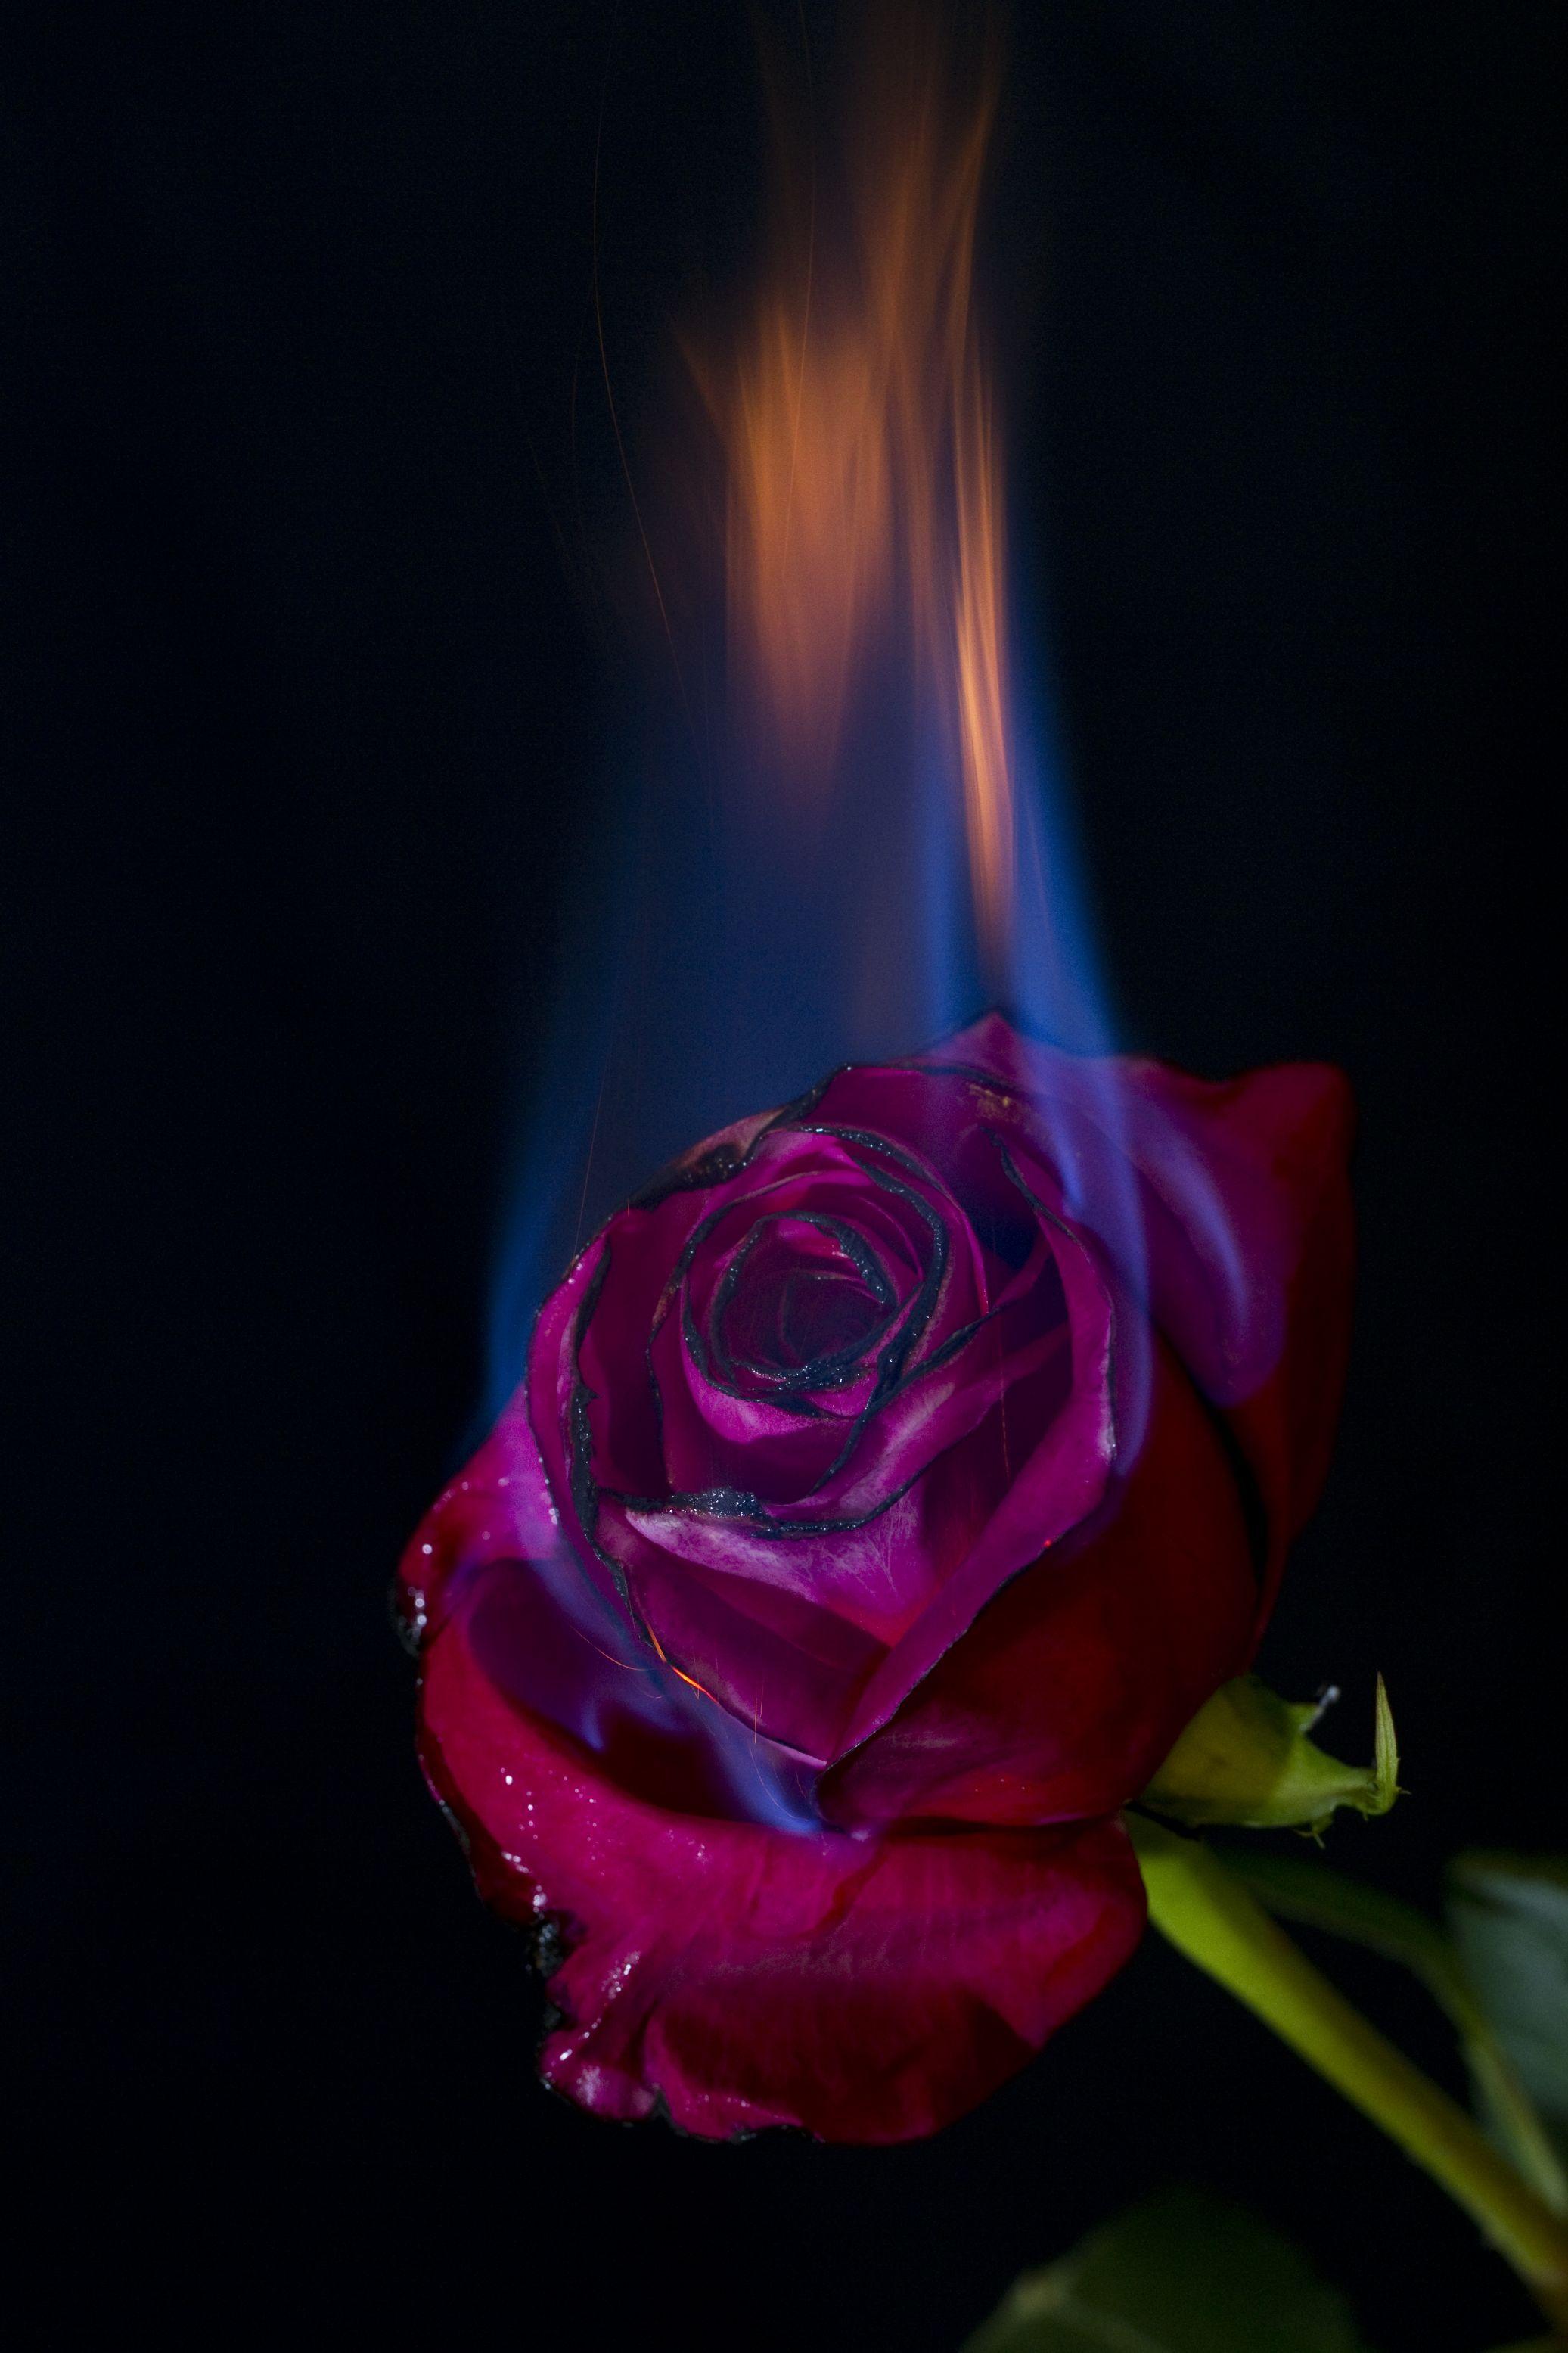 A little project I shot today. Rose on fire